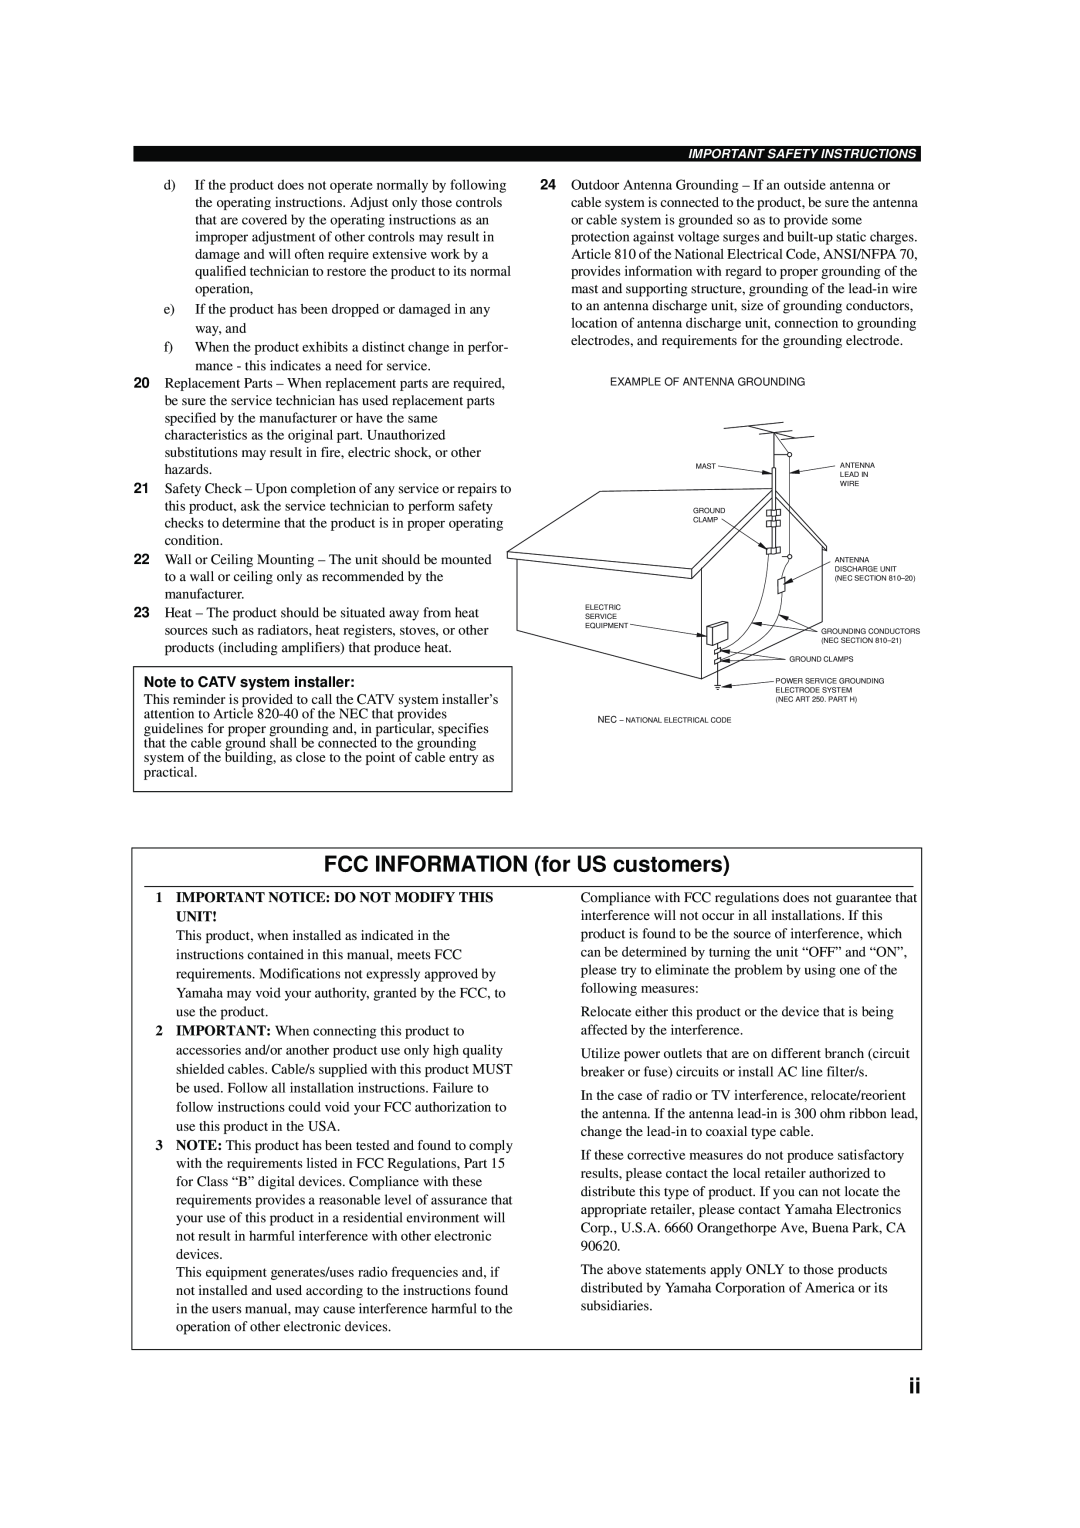 Yamaha RX-V457 owner manual FCC INFORMATION for US customers, Note to CATV system installer 